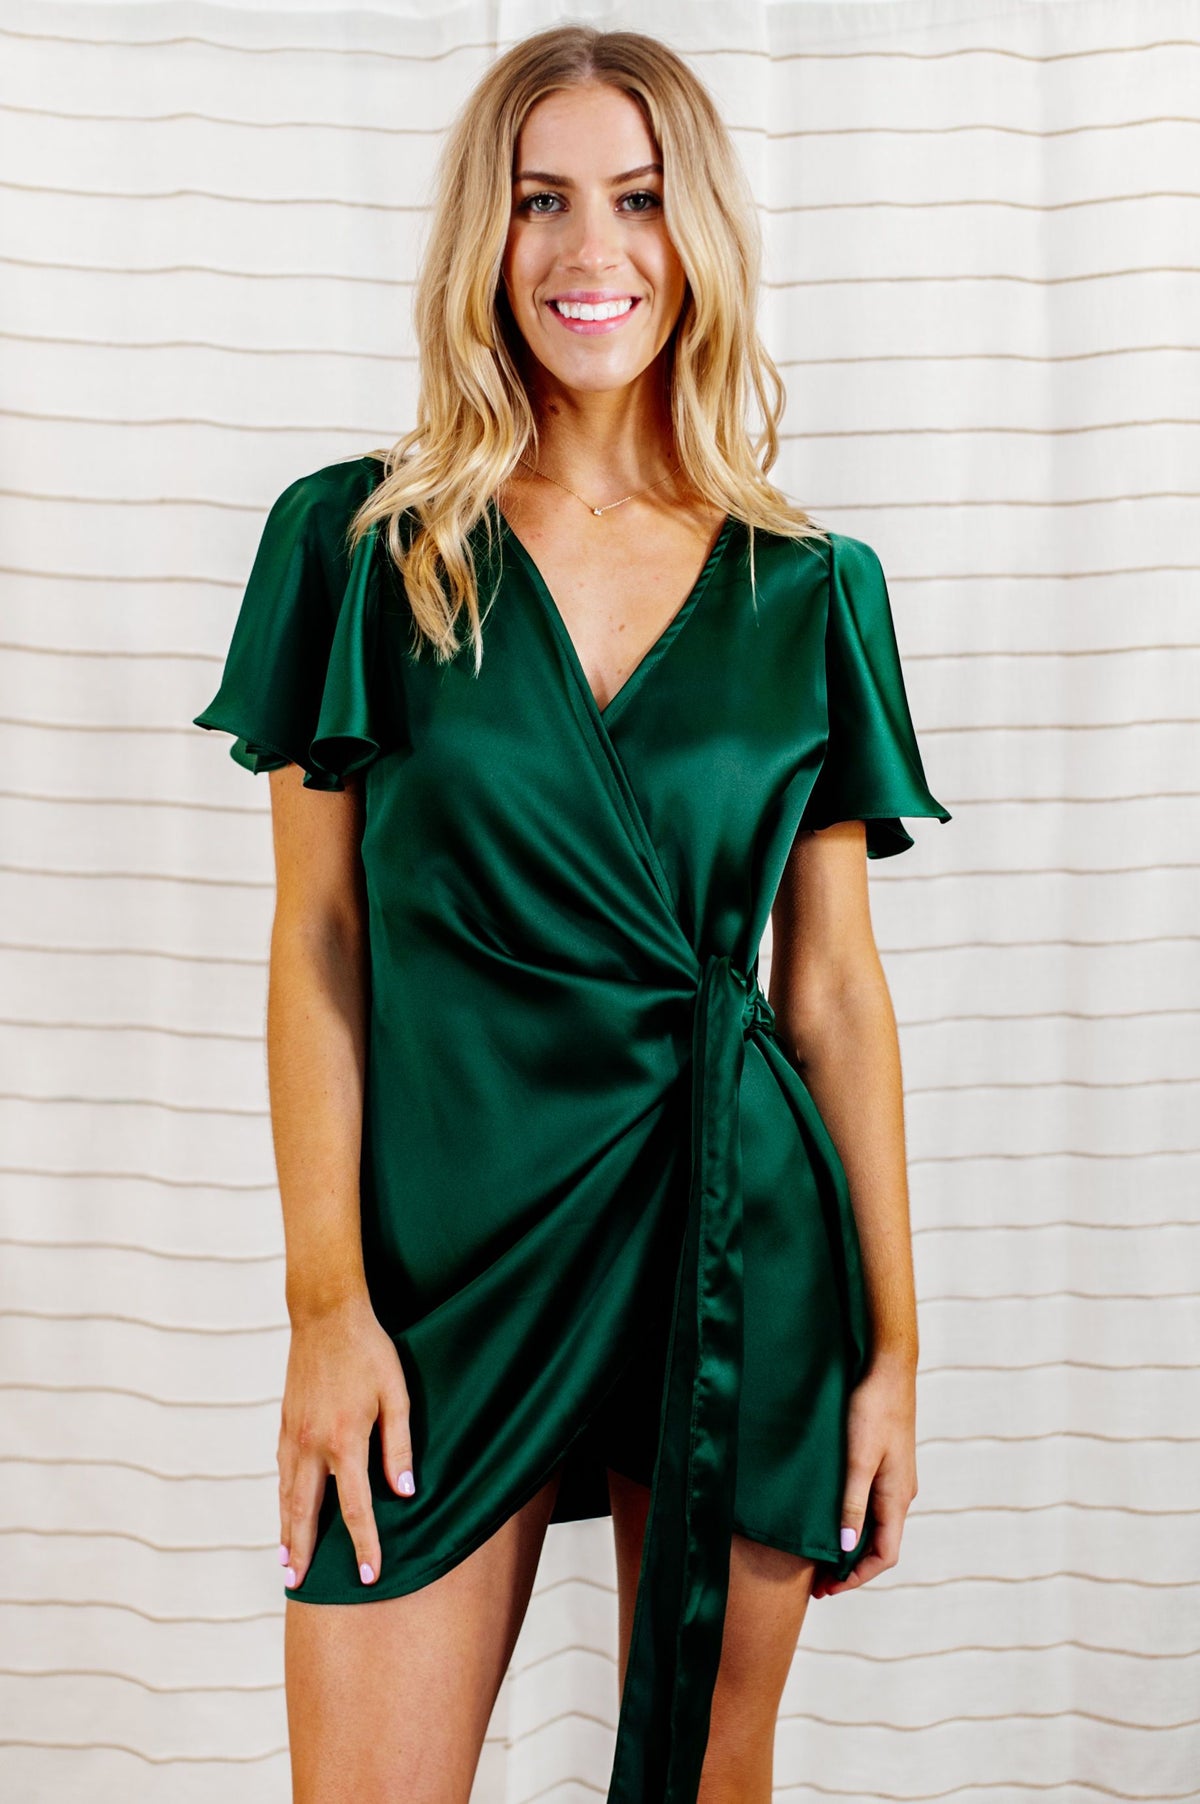 Pictured is a green, silky wrap dress with flowy sleeves and a wrap style body. 